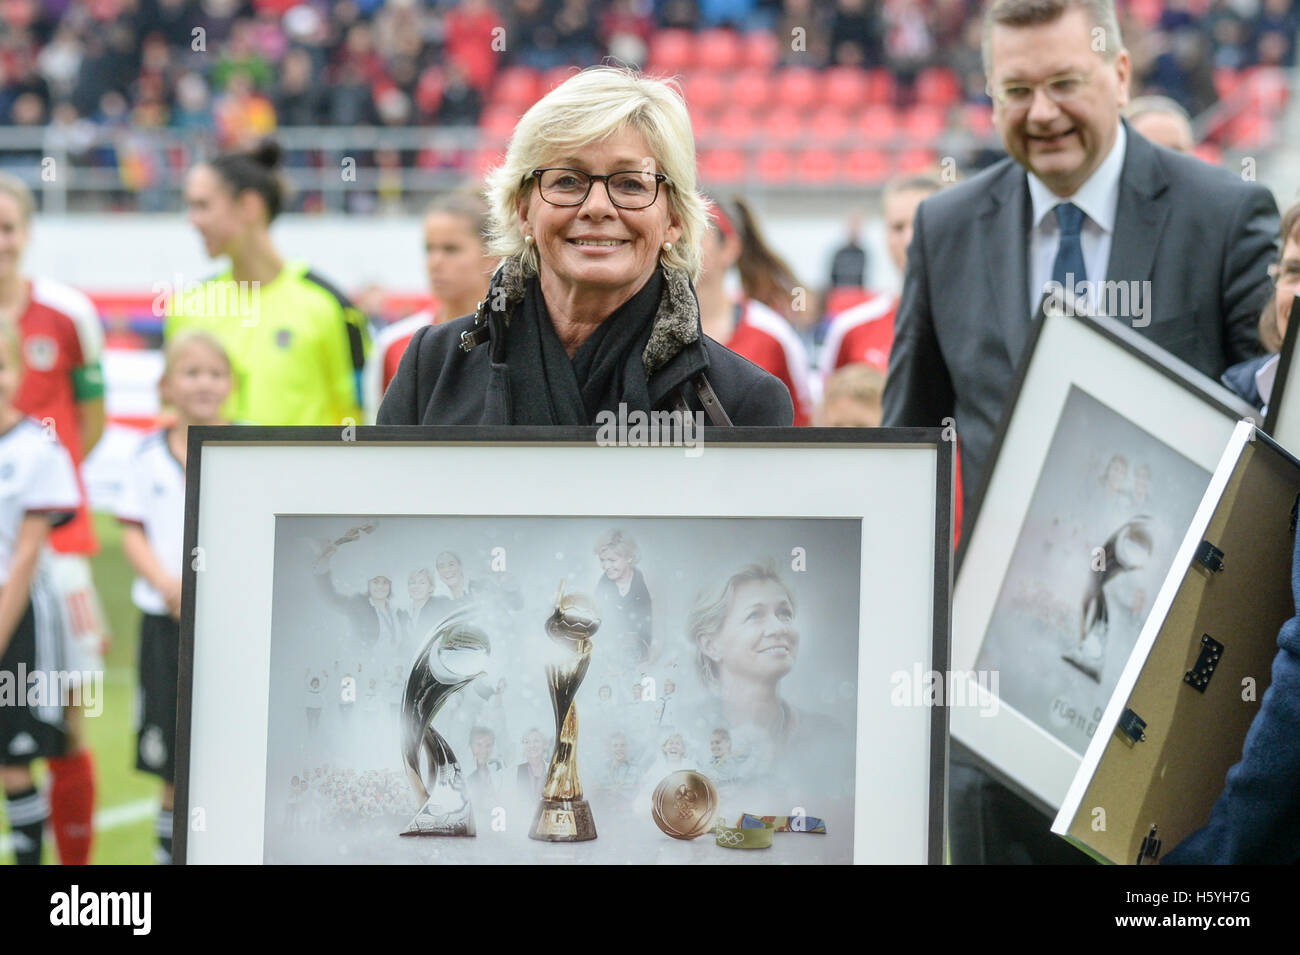 Regensburg, Germany. 22nd Oct, 2016. Germany's Women's National Soccer team coach Silvia Neid receiving her farewell after the Women's international soccer match between Germany and Austira at the Continental Arena in Regensburg, Germany, 22 October 2016. DFB President Reinhard Grindel can be seen behind her. PHOTO: ARMIN WEIGEL/dpa/Alamy Live News Stock Photo